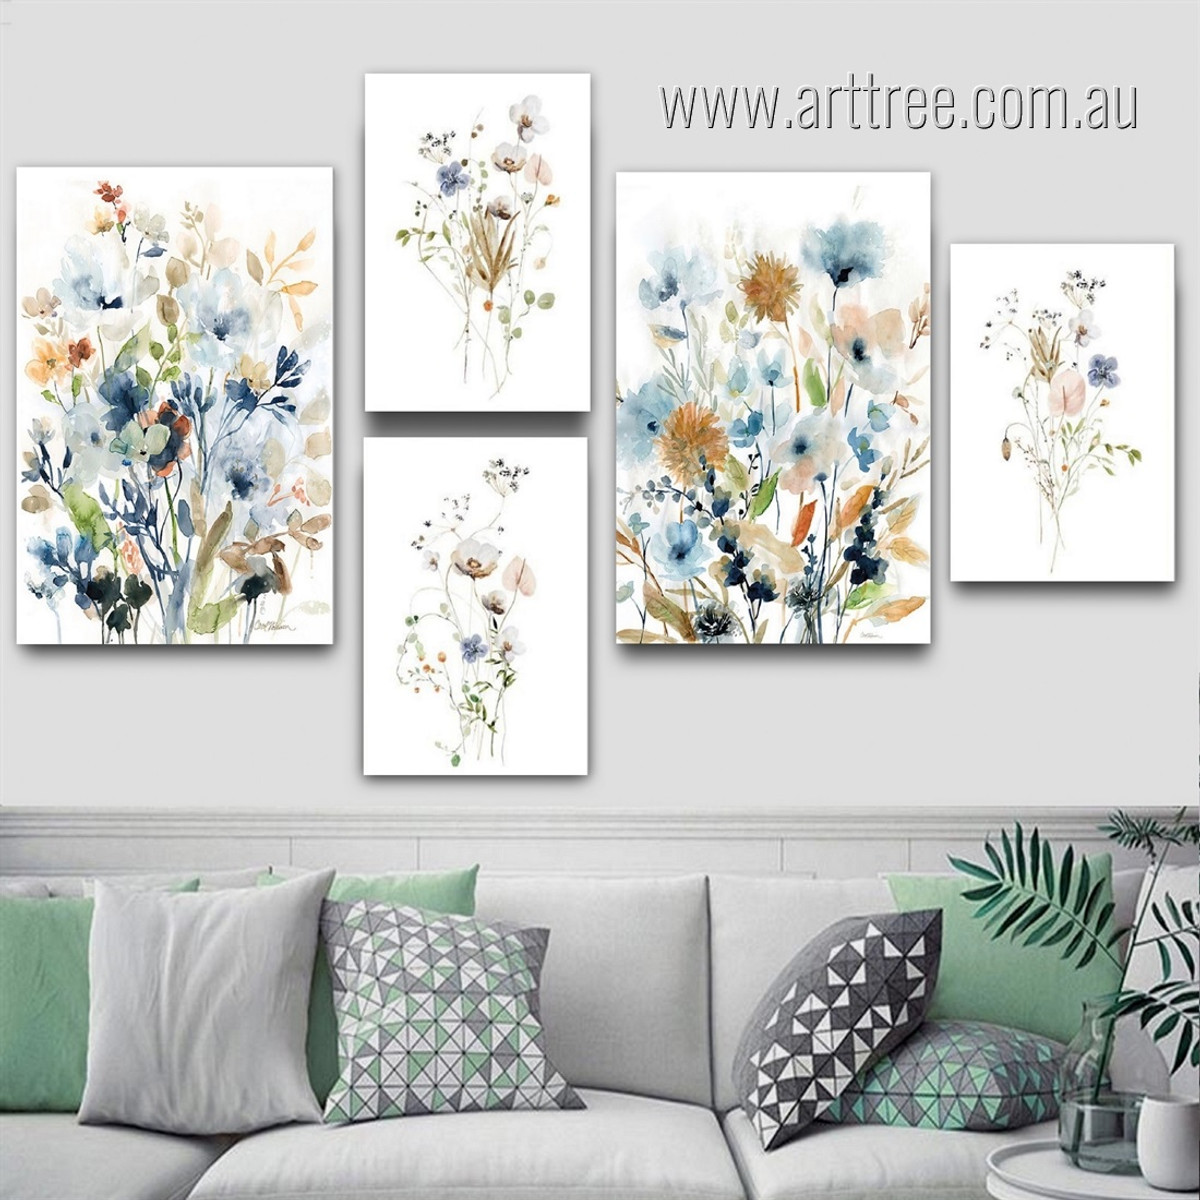 Watercolor Flowers Botanical Floral Abstract Modern Handmade Painting Image Framed Stretched 5 Panel Canvas Prints Set for Room Garniture